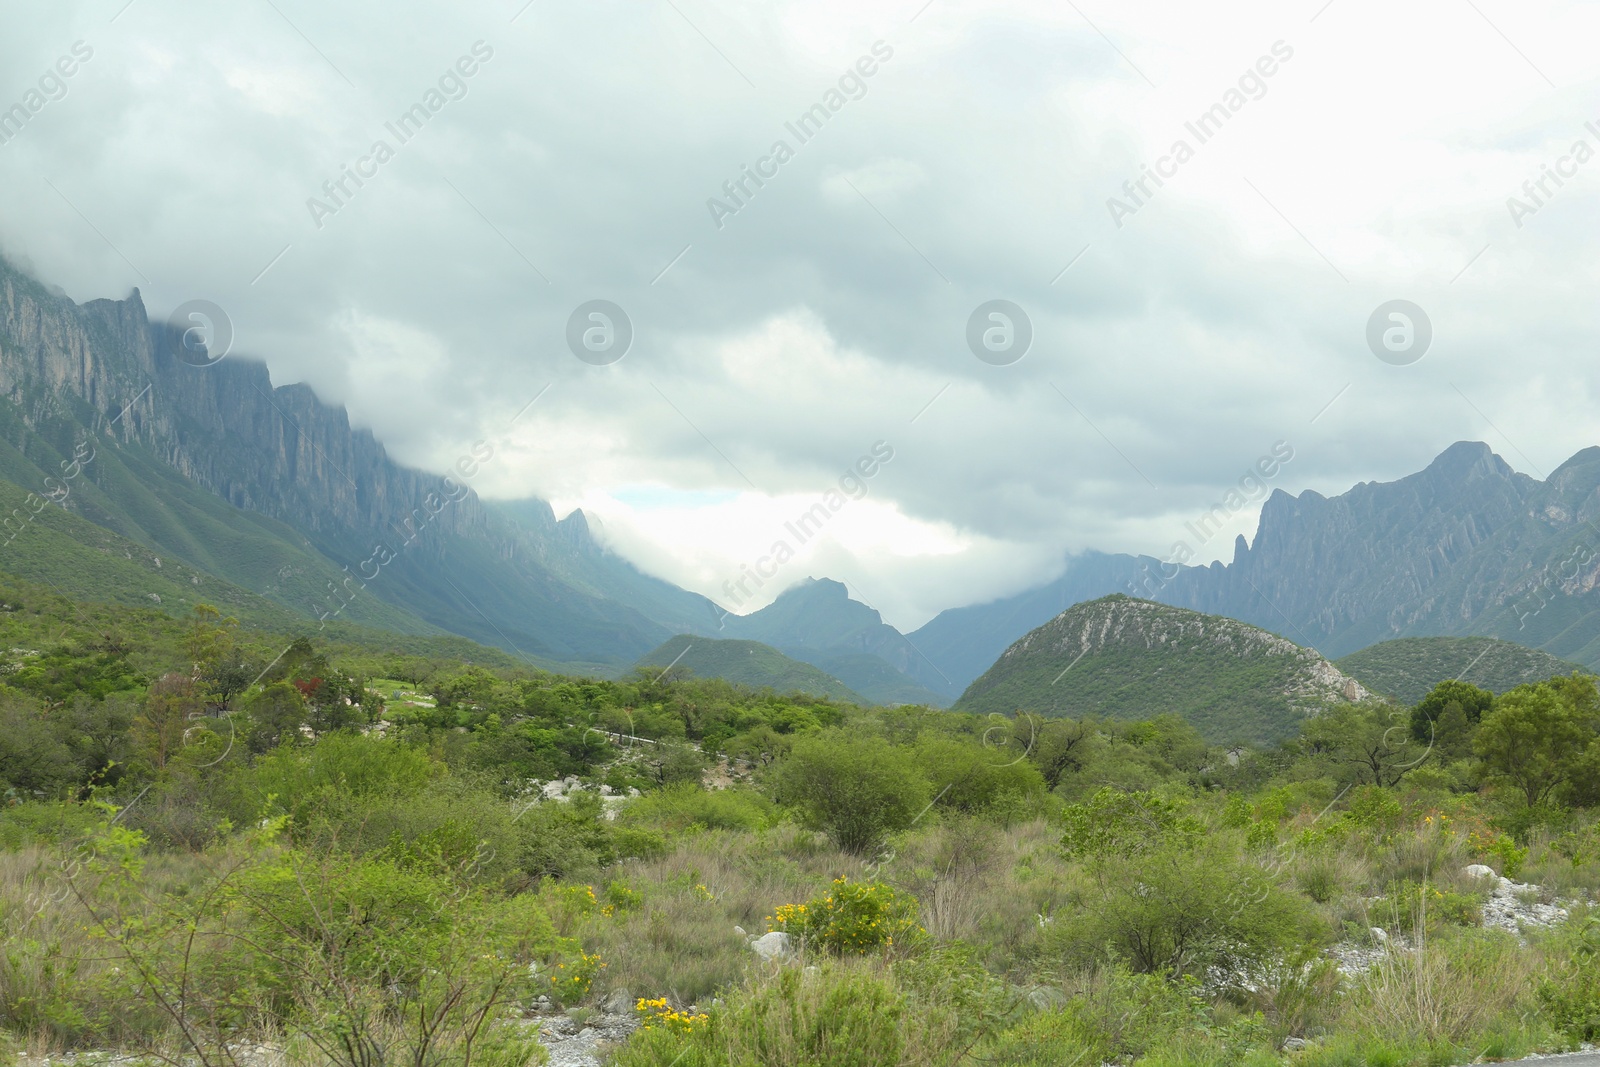 Photo of Picturesque landscape with high mountains and fog under cloudy sky